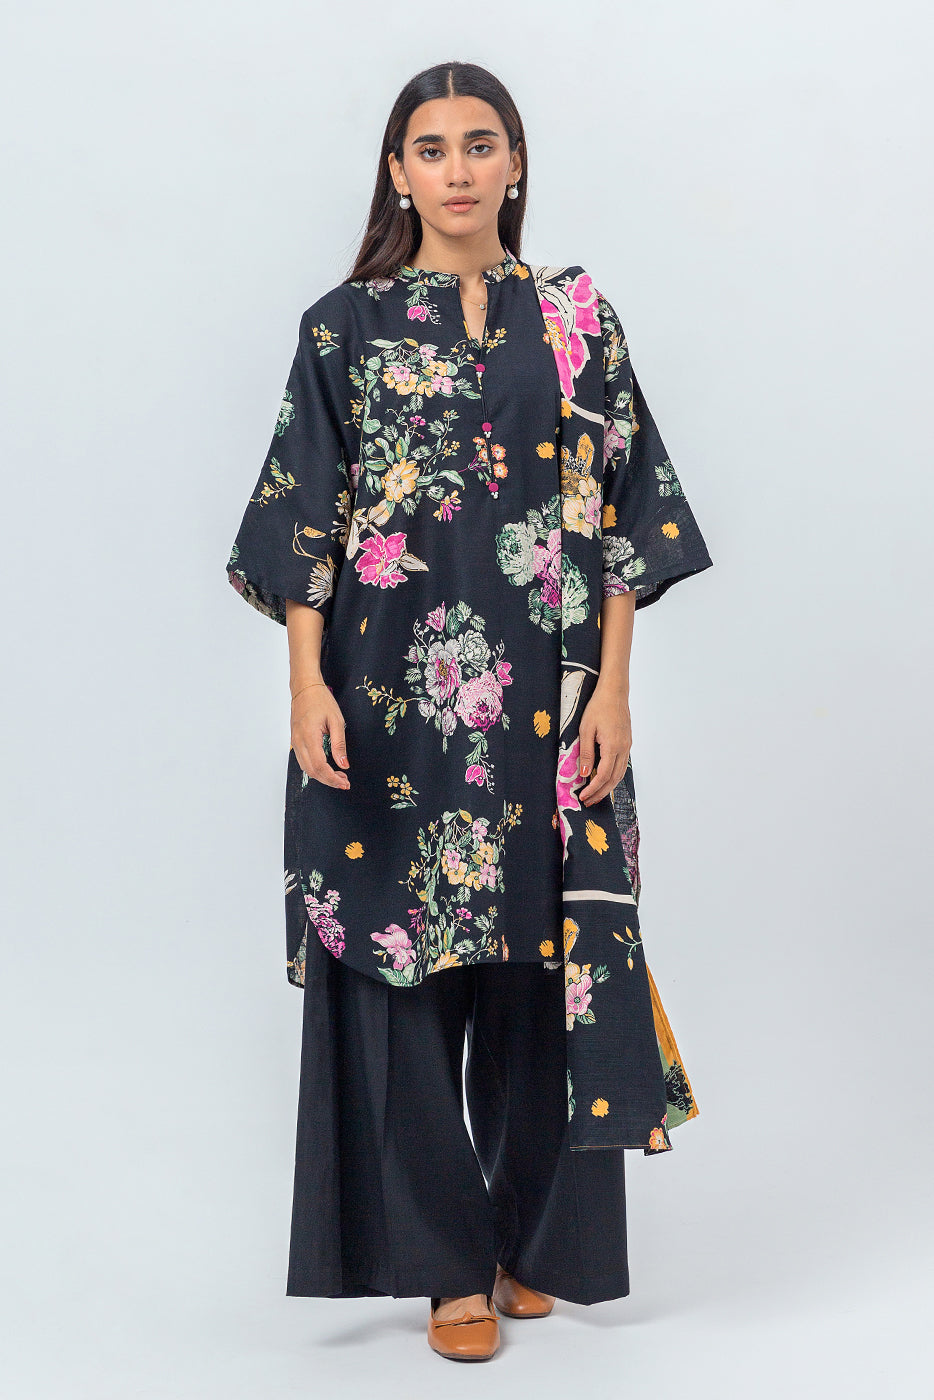 2 PIECE - PRINTED KHADDAR SUIT - MELLOW GROOVE (UNSTITCHED) - BEECHTREE